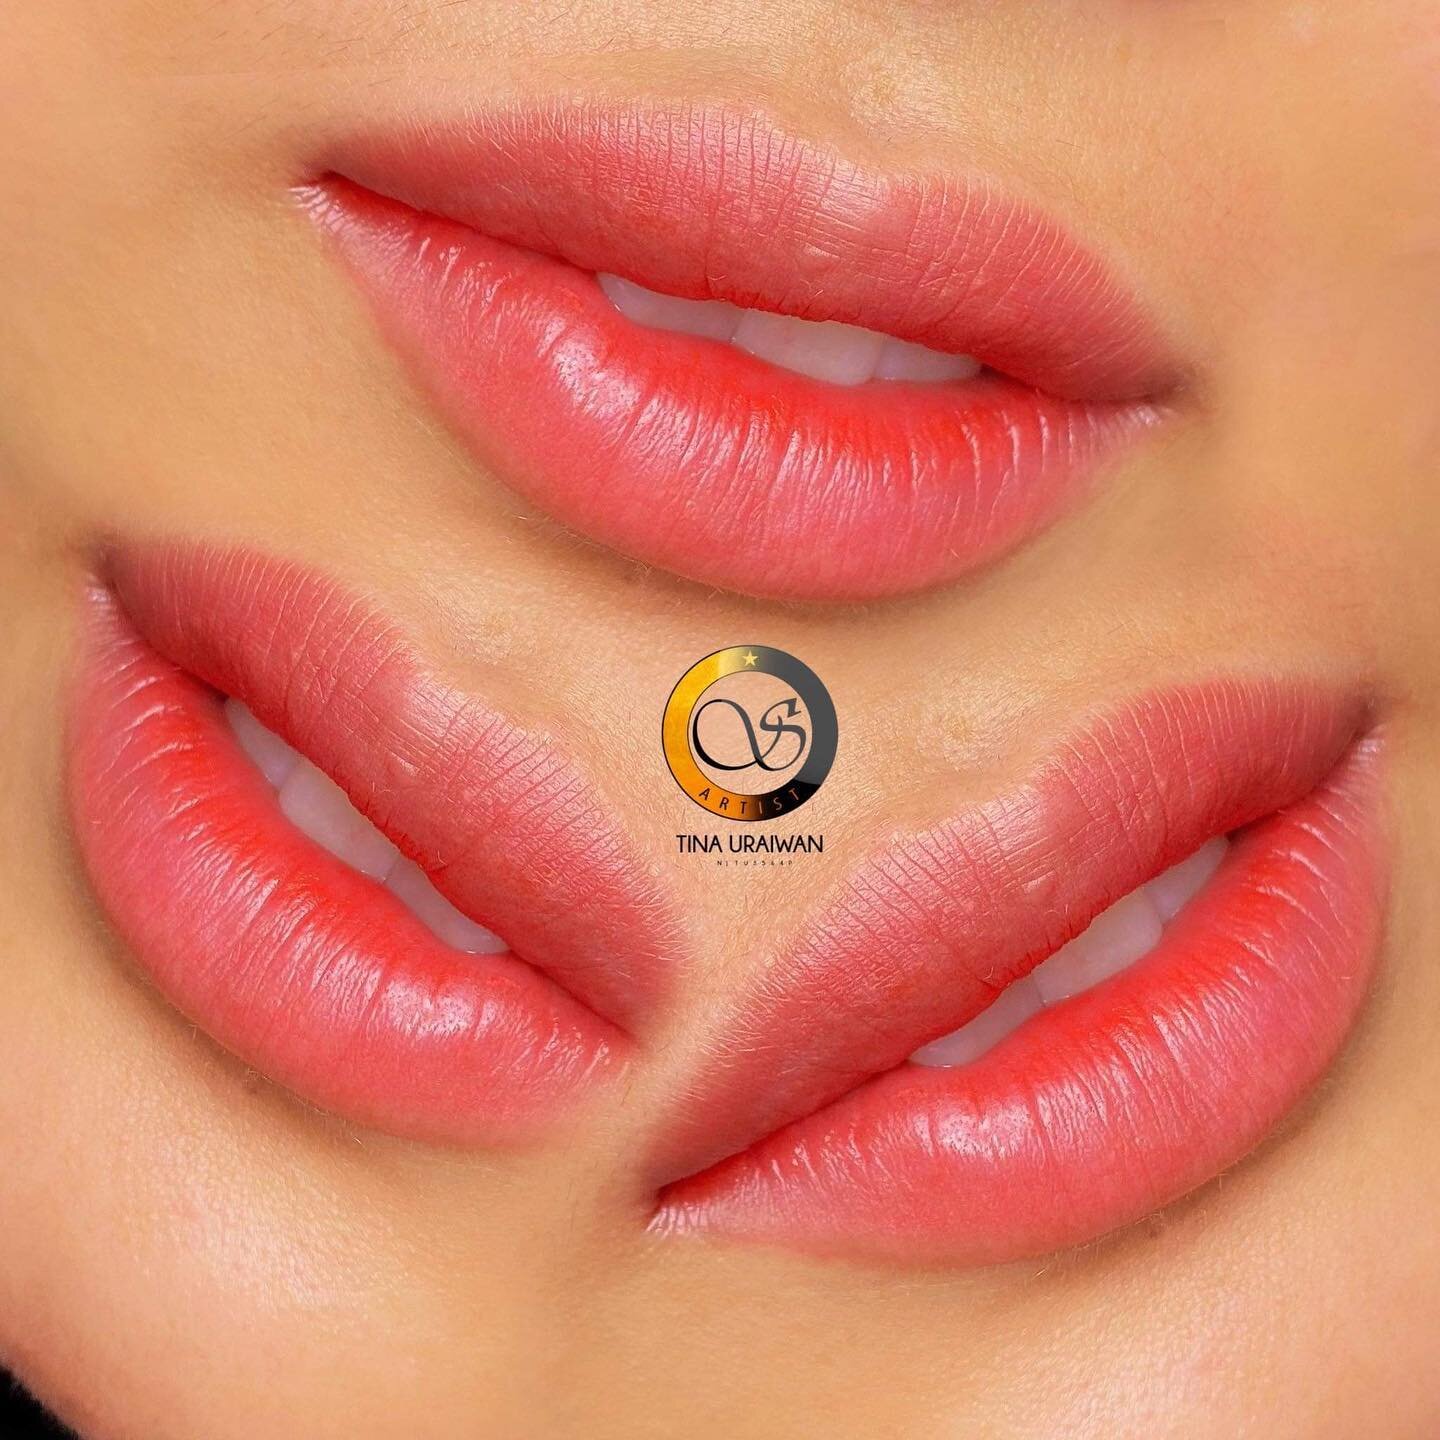 Lip tattoo by Tina ✨ how amazing does the lips look!? Looks very natural yet the perfect shade of pink to compliment the skin tone! Love it! Book your appointment now! Dm for more details 💋